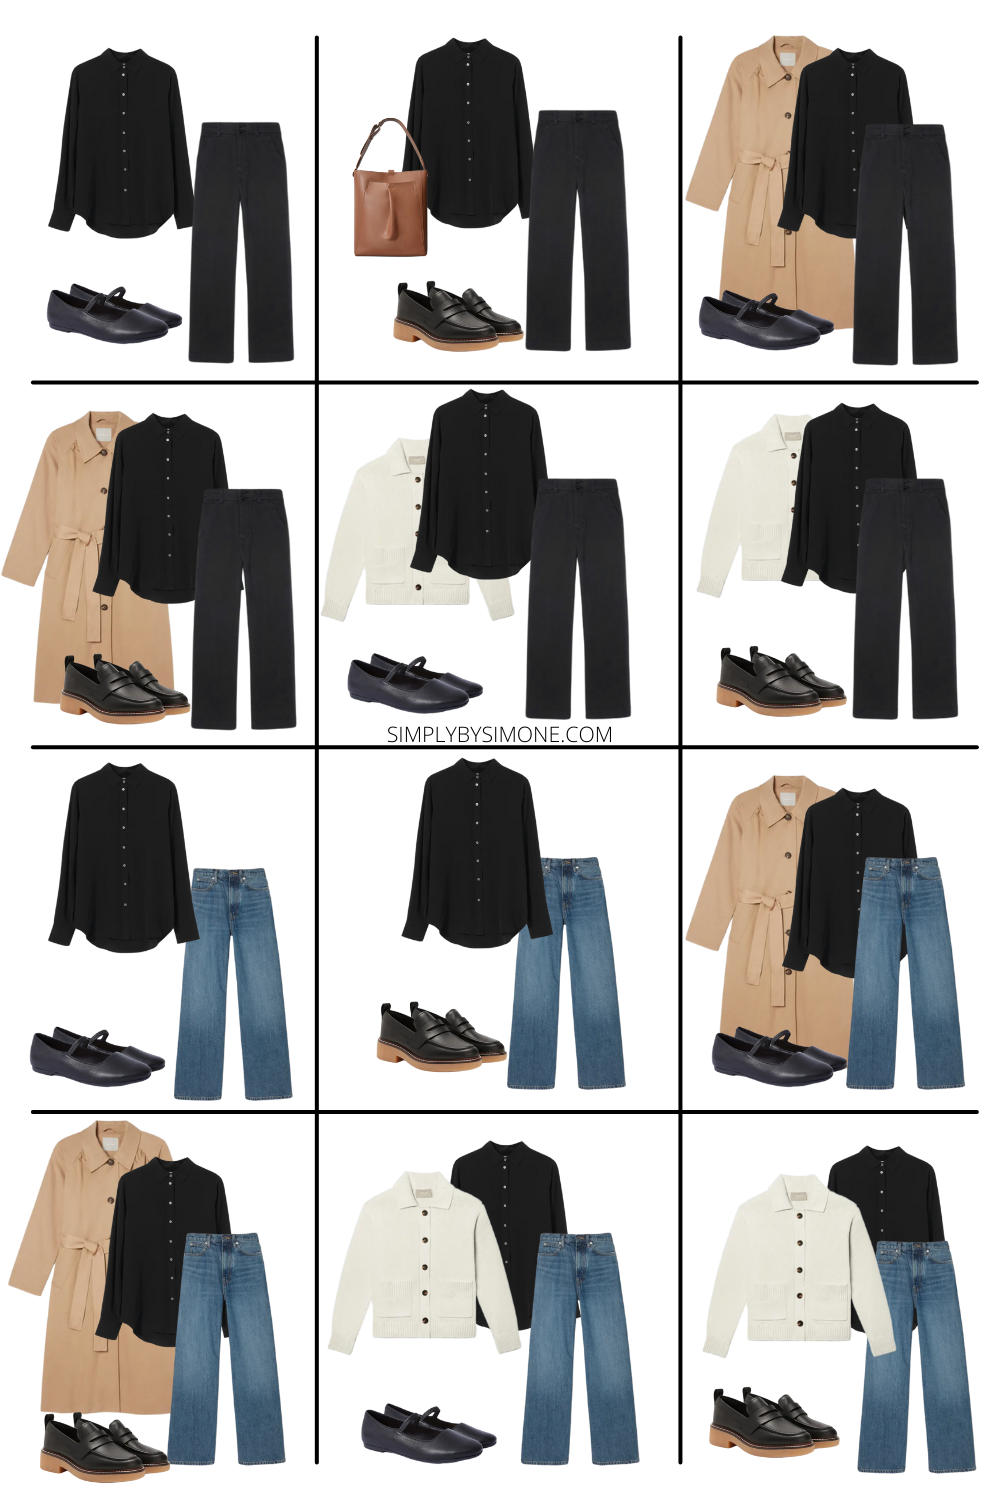 Affordable Everlane Fall Capsule Wardrobe | 10 Pieces, 24 Outfits | How to Build a Capsule Wardrobe | Everlane Fall Clothes | Outfit Inspiration | 24 Fall Weather Outfit Ideas | Fall Vacation Packing Guide | Everlane Fall Capsule Wardrobe | 10 Items to Wear This Fall | Looks 1-12 | Simply by Simone